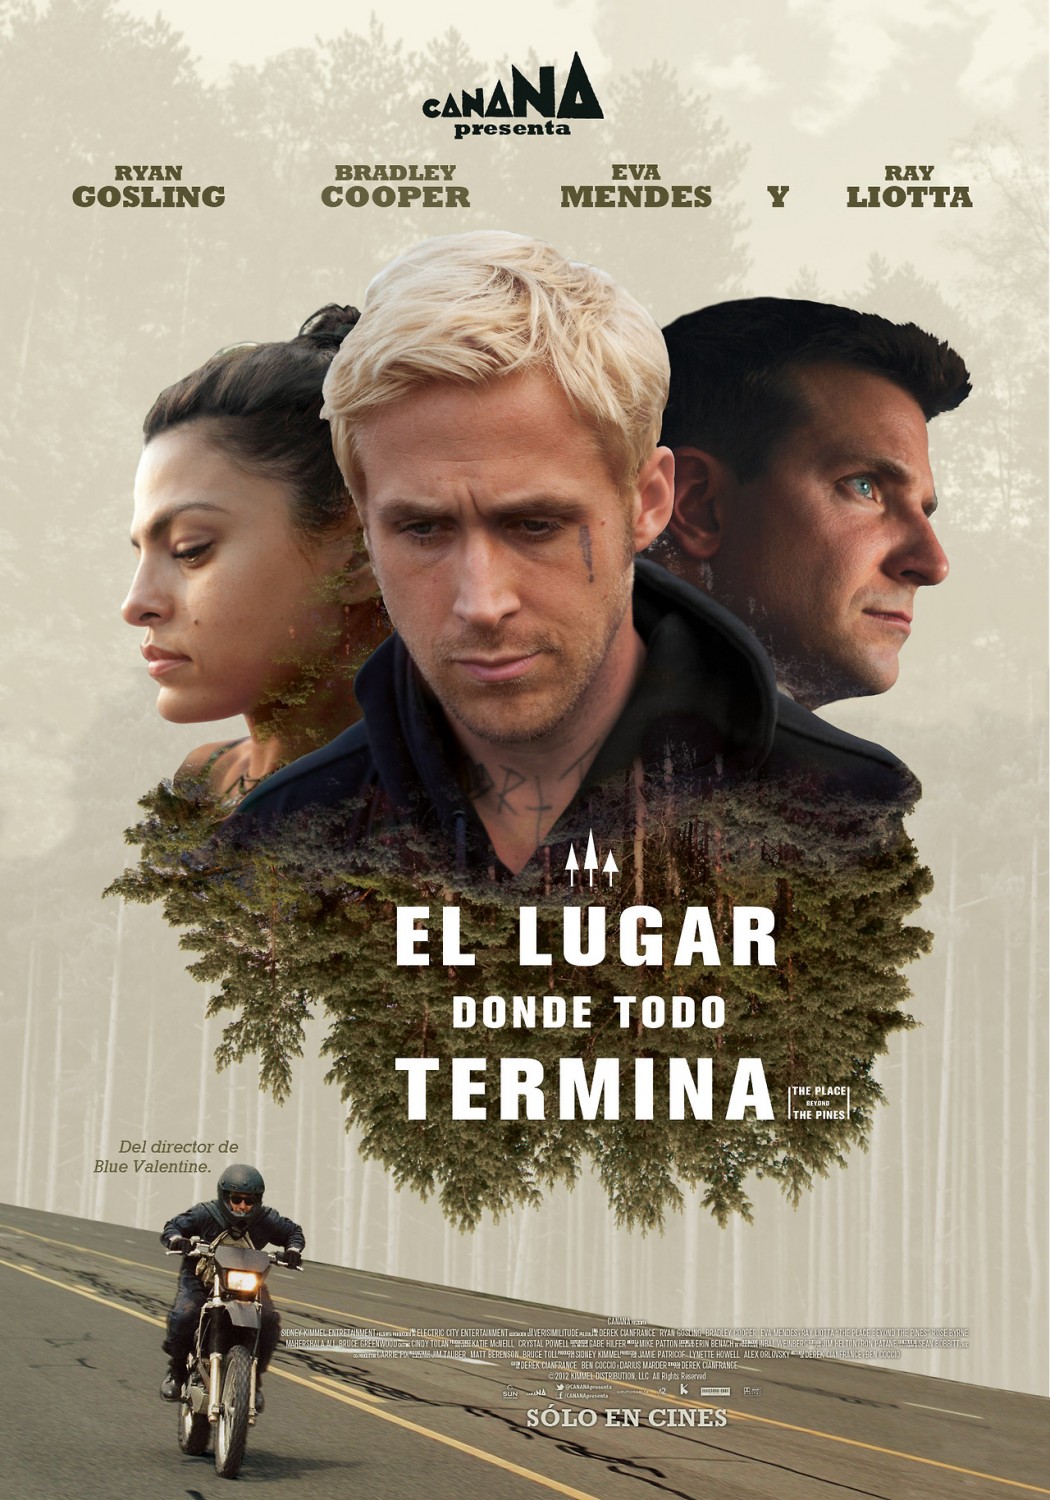 place beyond the pines movie poster